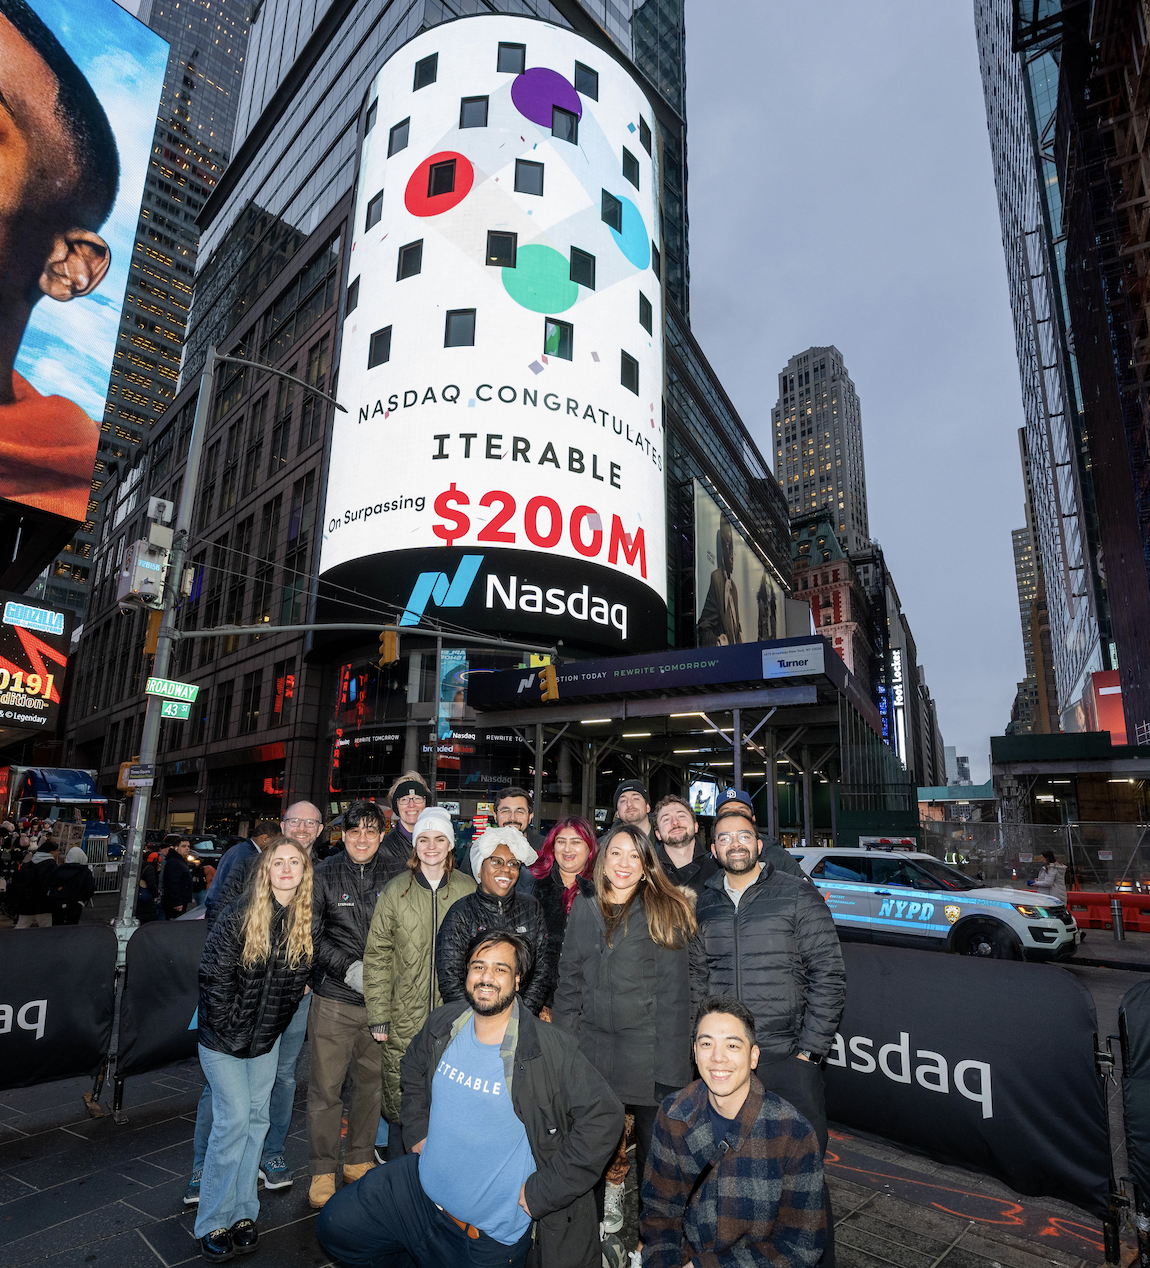 Photo outside the NASDAQ Tower which is displaying the Iterable logo and "$200m ARR."